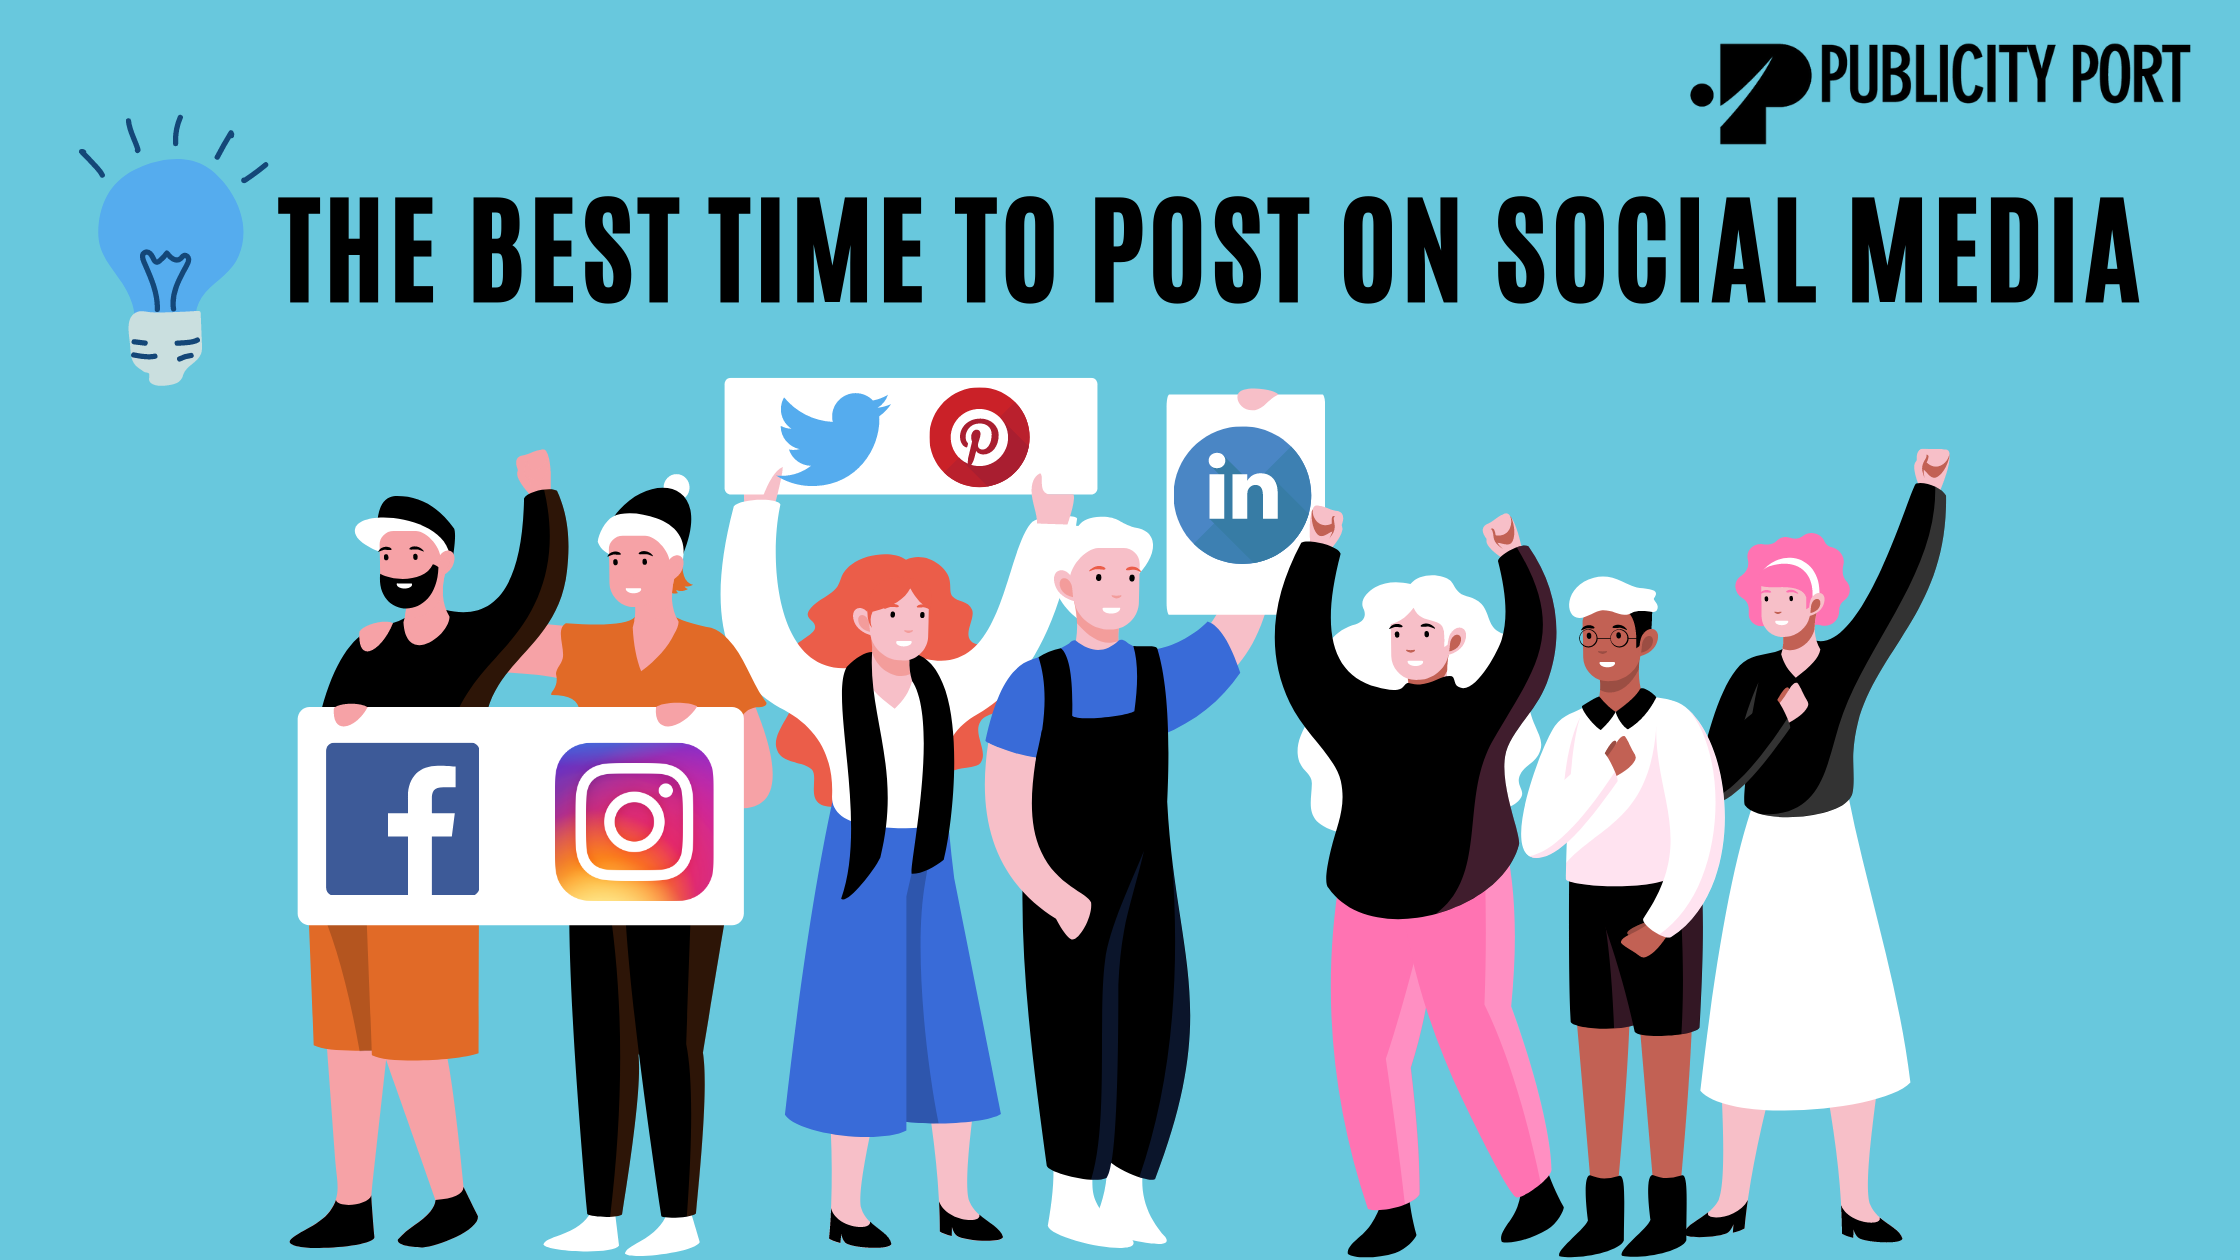 [2021 Update] What Is The Best Time For Publishing Social Media Posts?